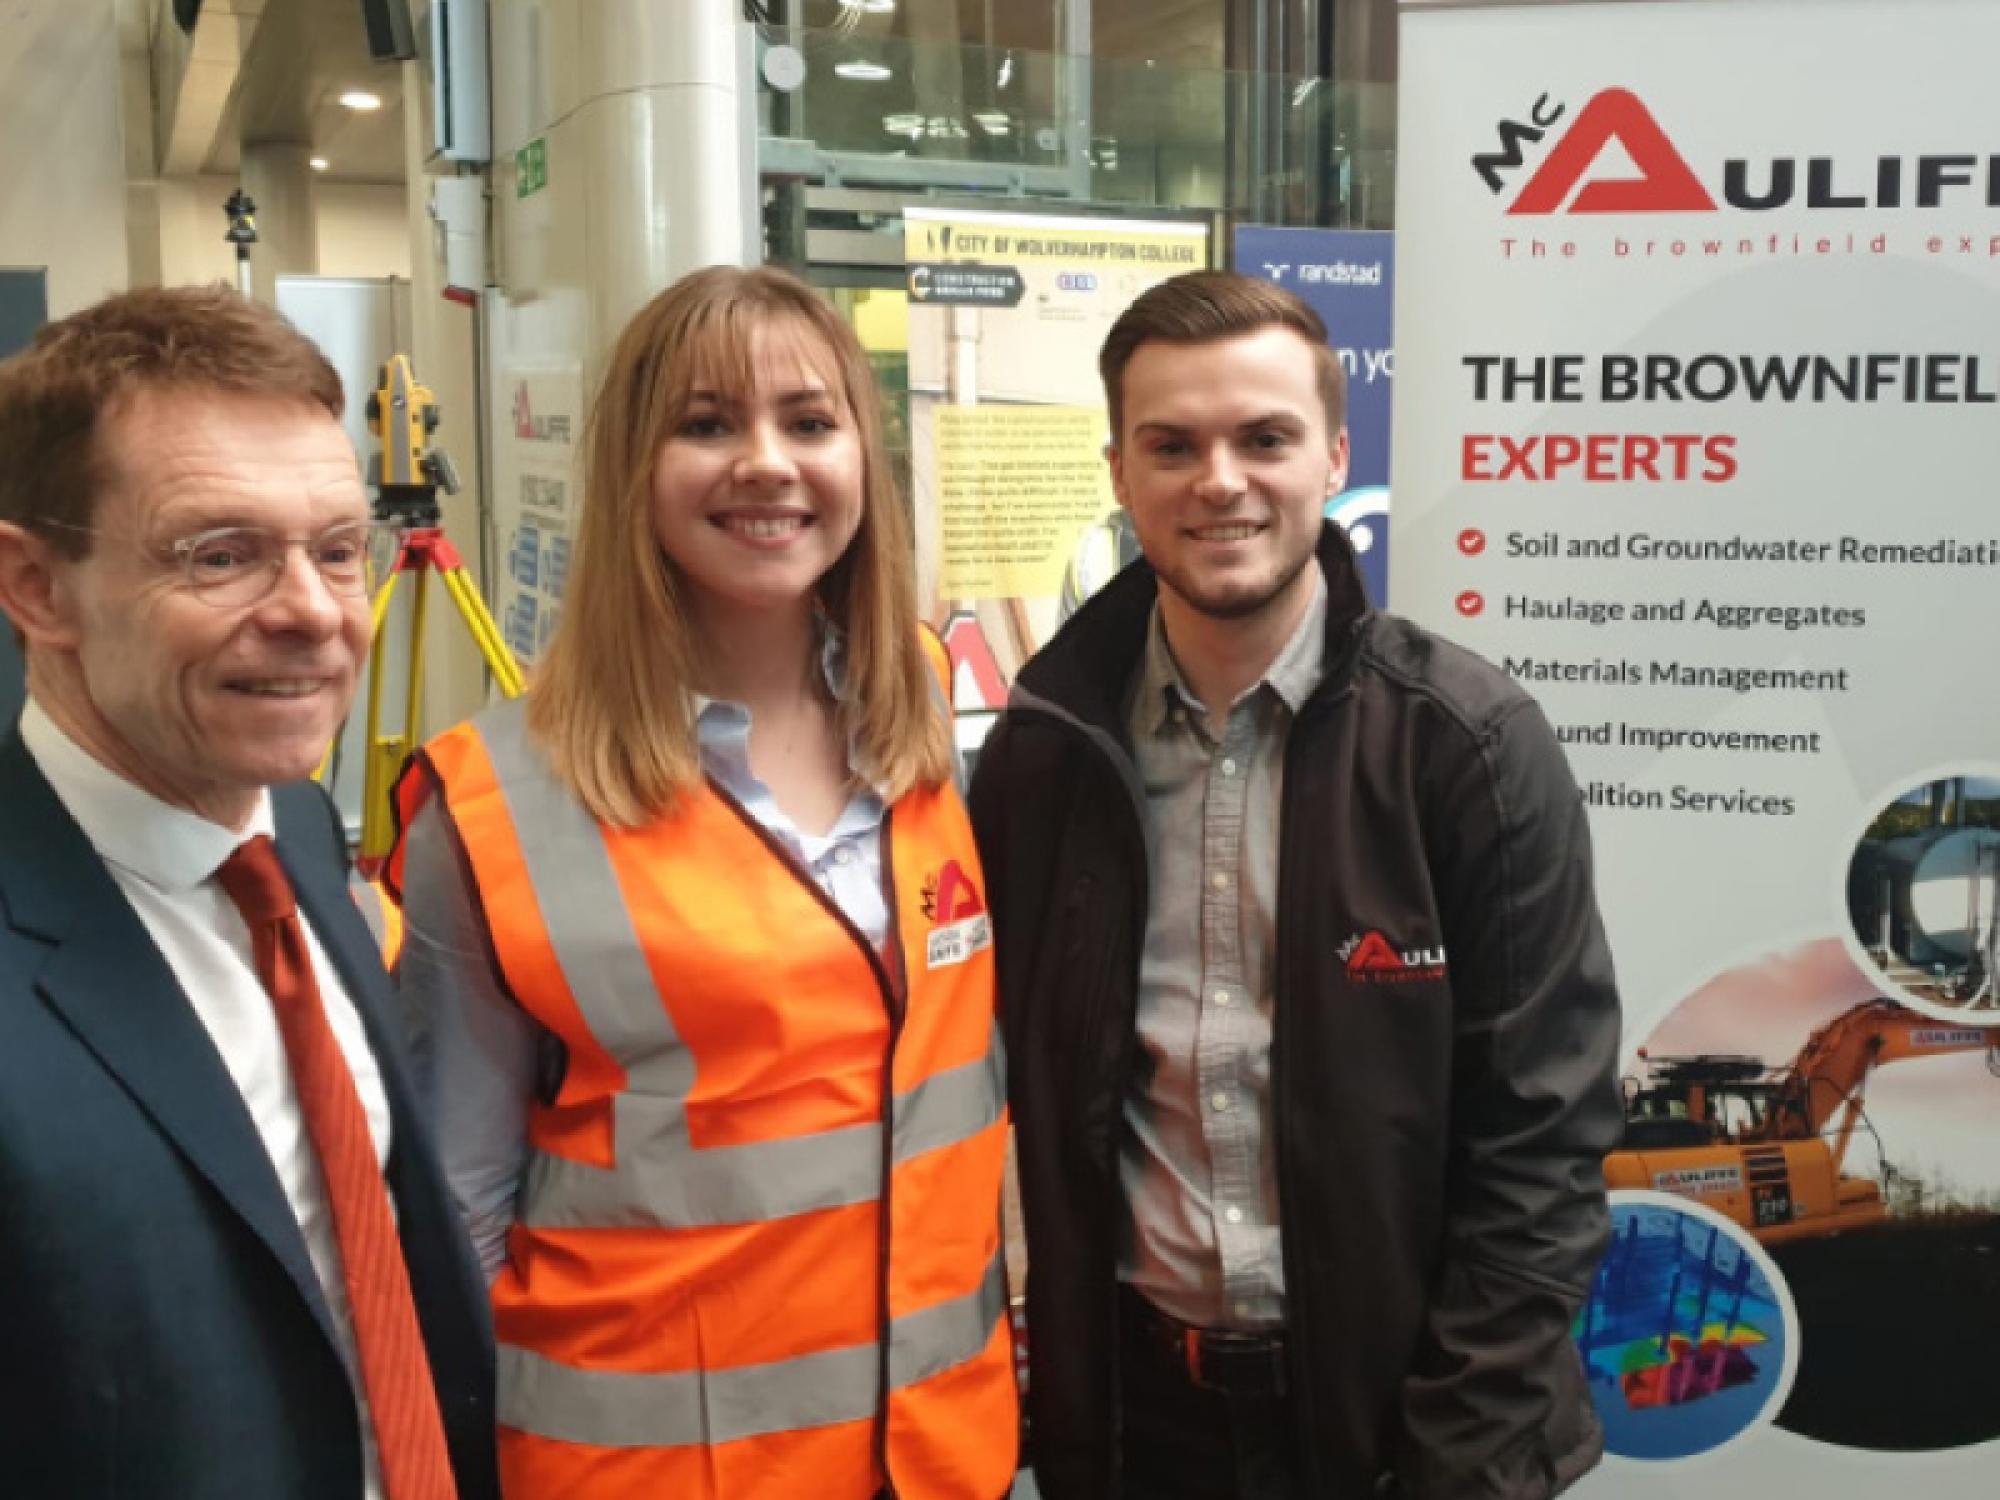 McAuliffe dishes out career advice at WMCA ‘Plant Careers Live’ event